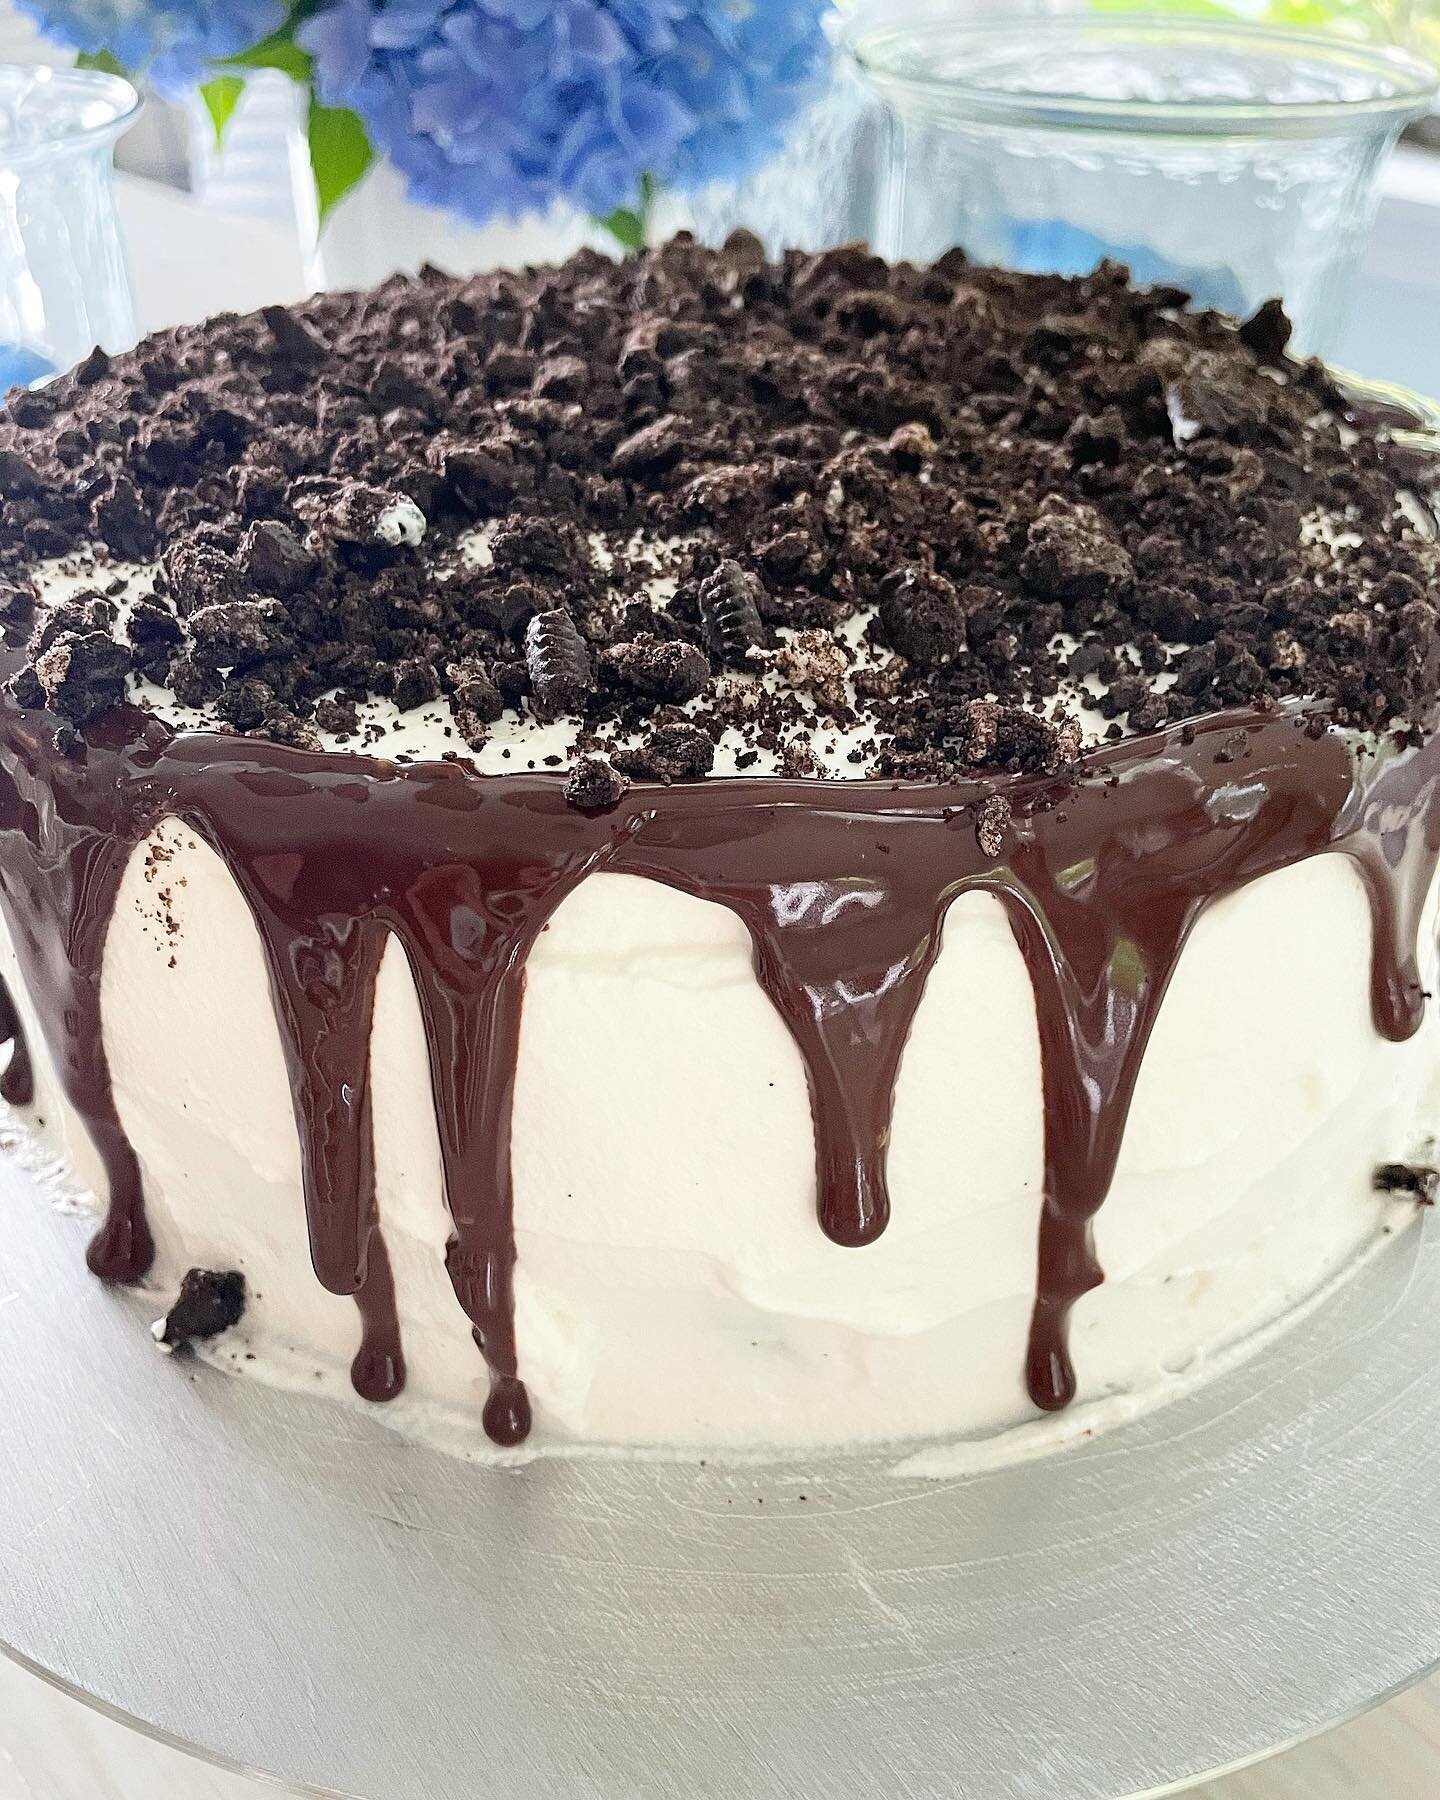 Celebrating the first day of summer with Oreo ice cream cake☀️
Two layers of chocolate cake, Oreo ice cream, ganache, crushed Oreo cookies, all topped with Chantilly cream🤗

#summertime 
#dessert 
#icecream 
#icecreamcake 
#oreo 
#chocolatecake 
#ga